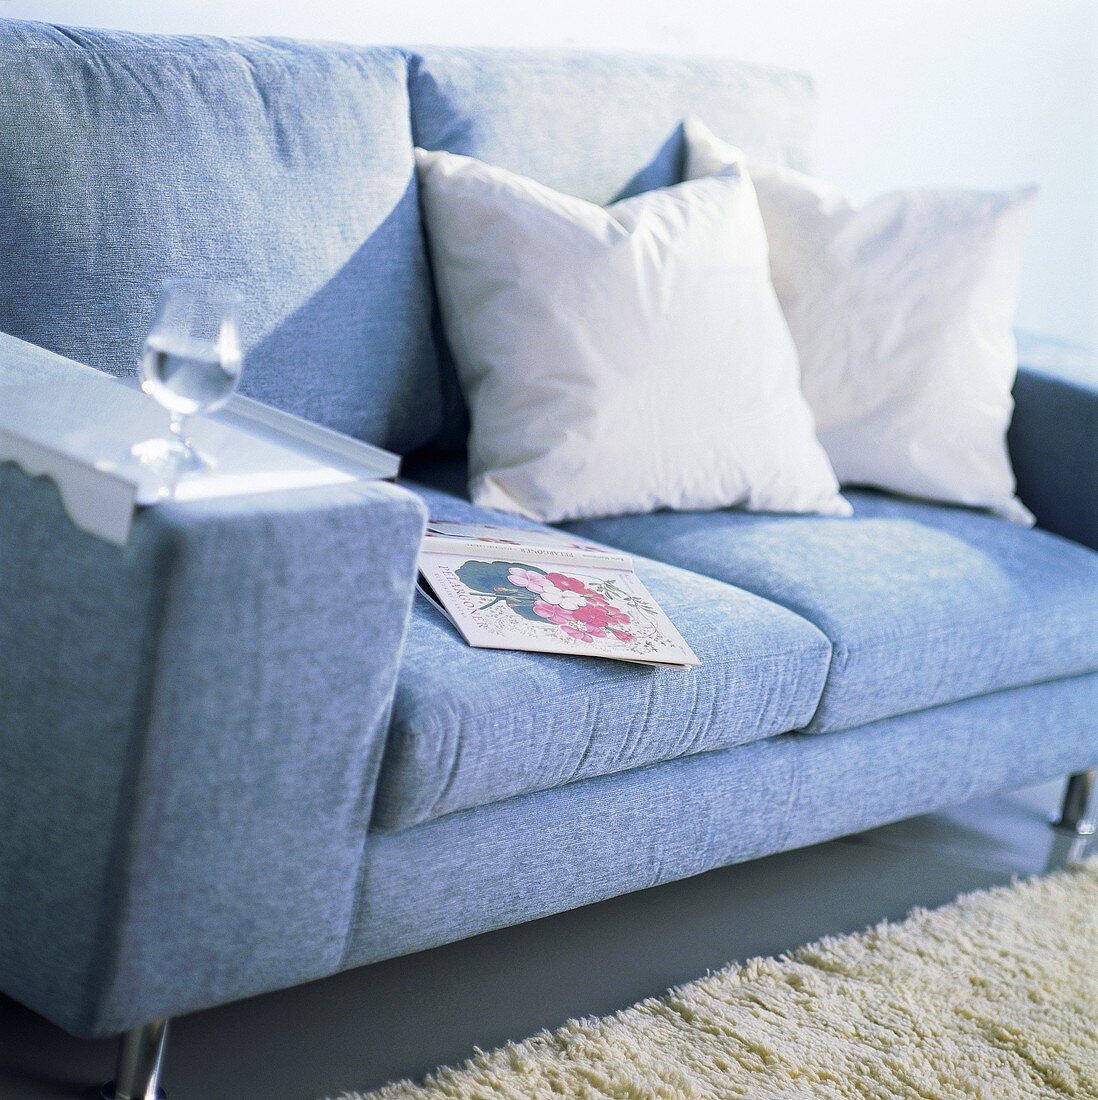 Blue couch with cushions, book and a glass of water